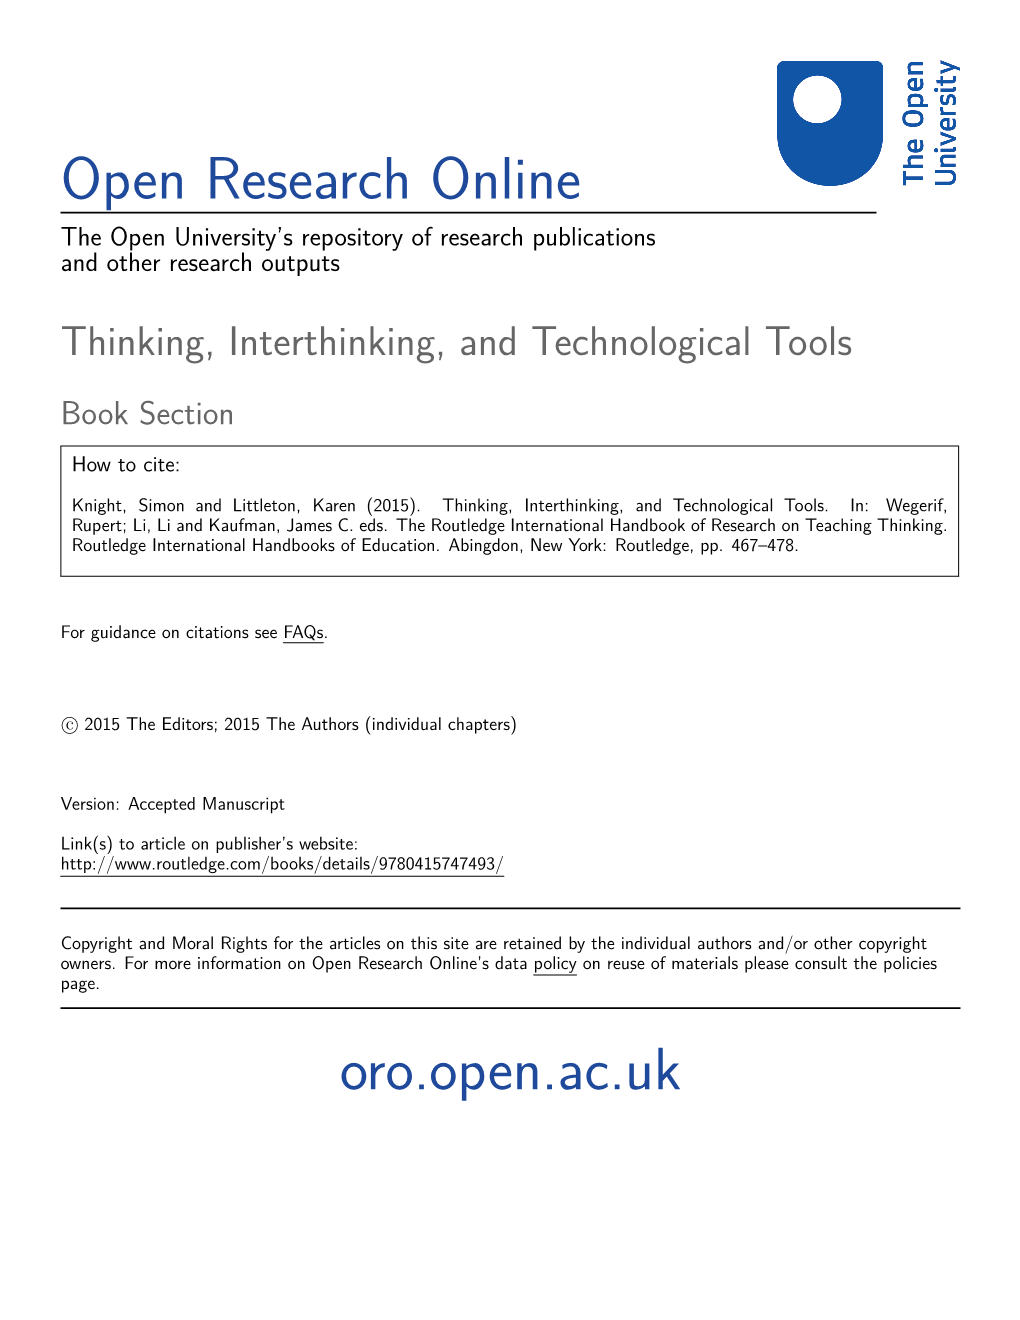 Interthinking, and Technological Tools